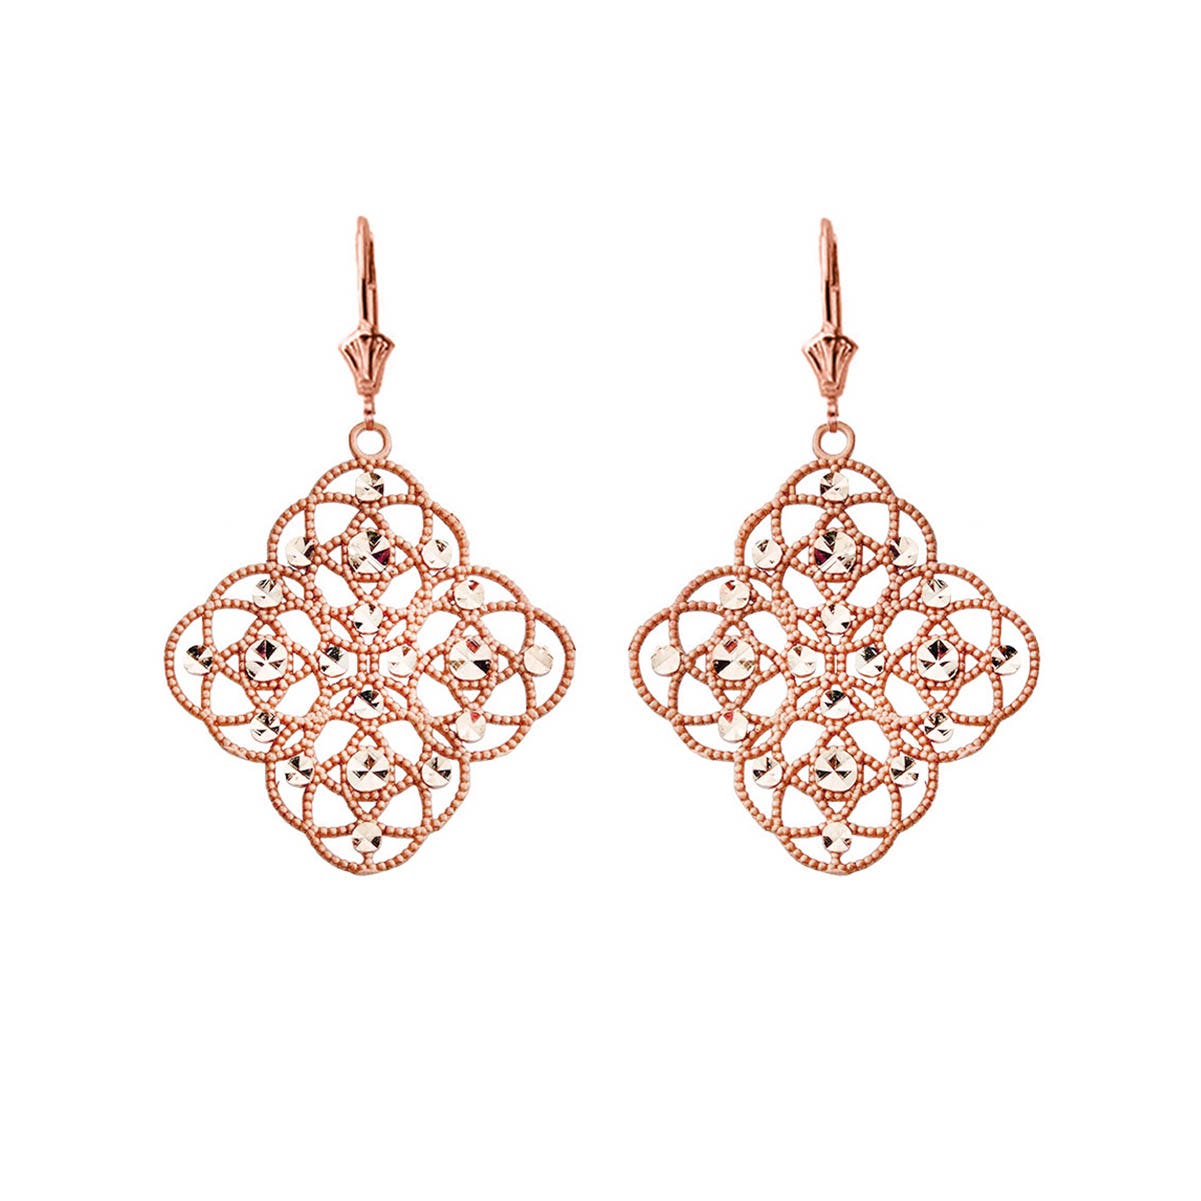 Earrings in Rose - Gold Boutique Man - Gold Boutique GOOFASH